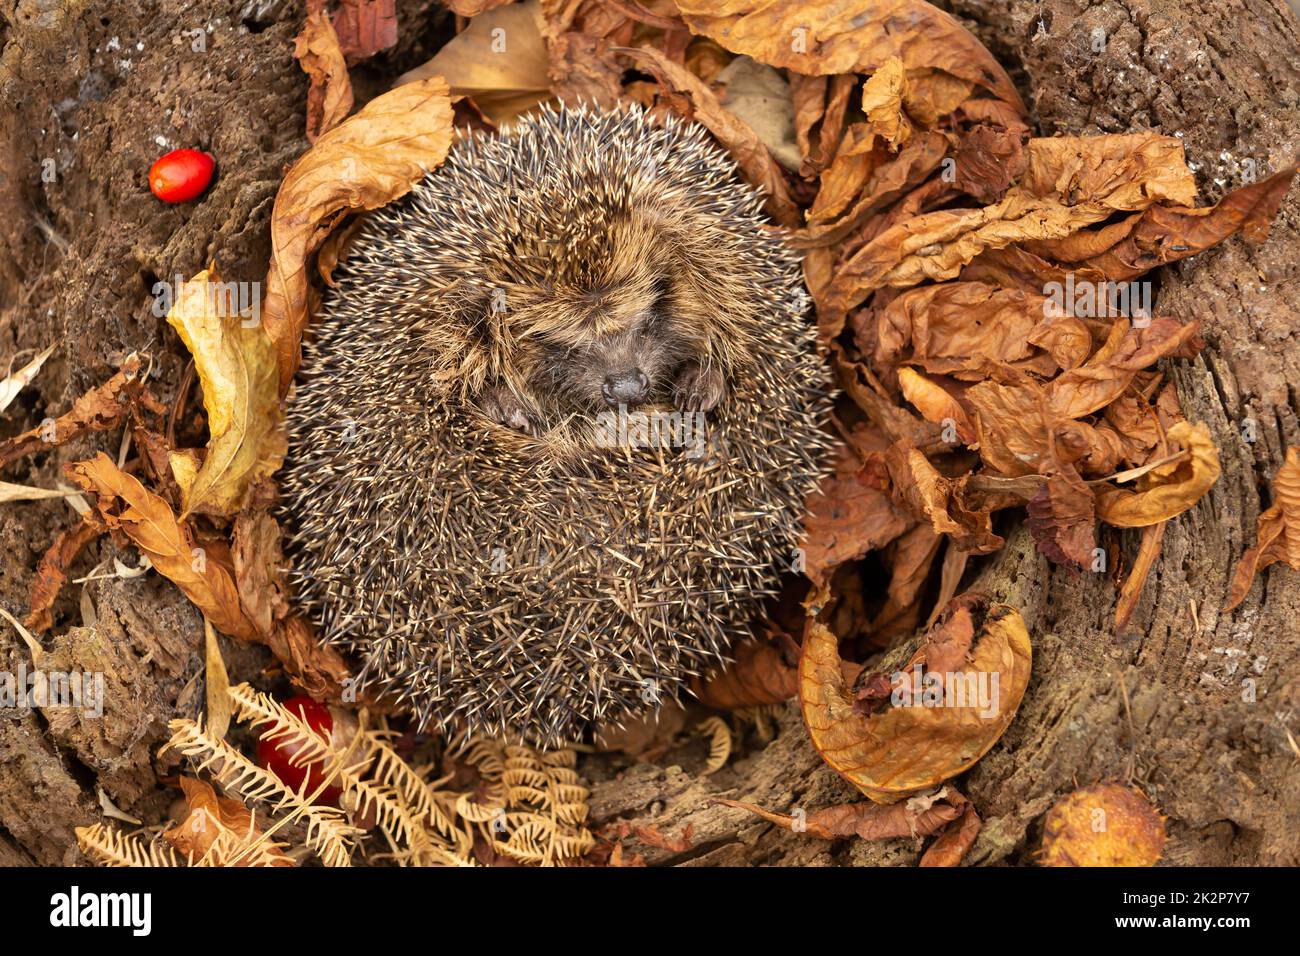 Hedgehog, Scientific name: Erinaceus Europaeus. Close-up of a wild, native, European hedgehog in Autumn fast asleep in golden syscamore leaves and fer Stock Photo